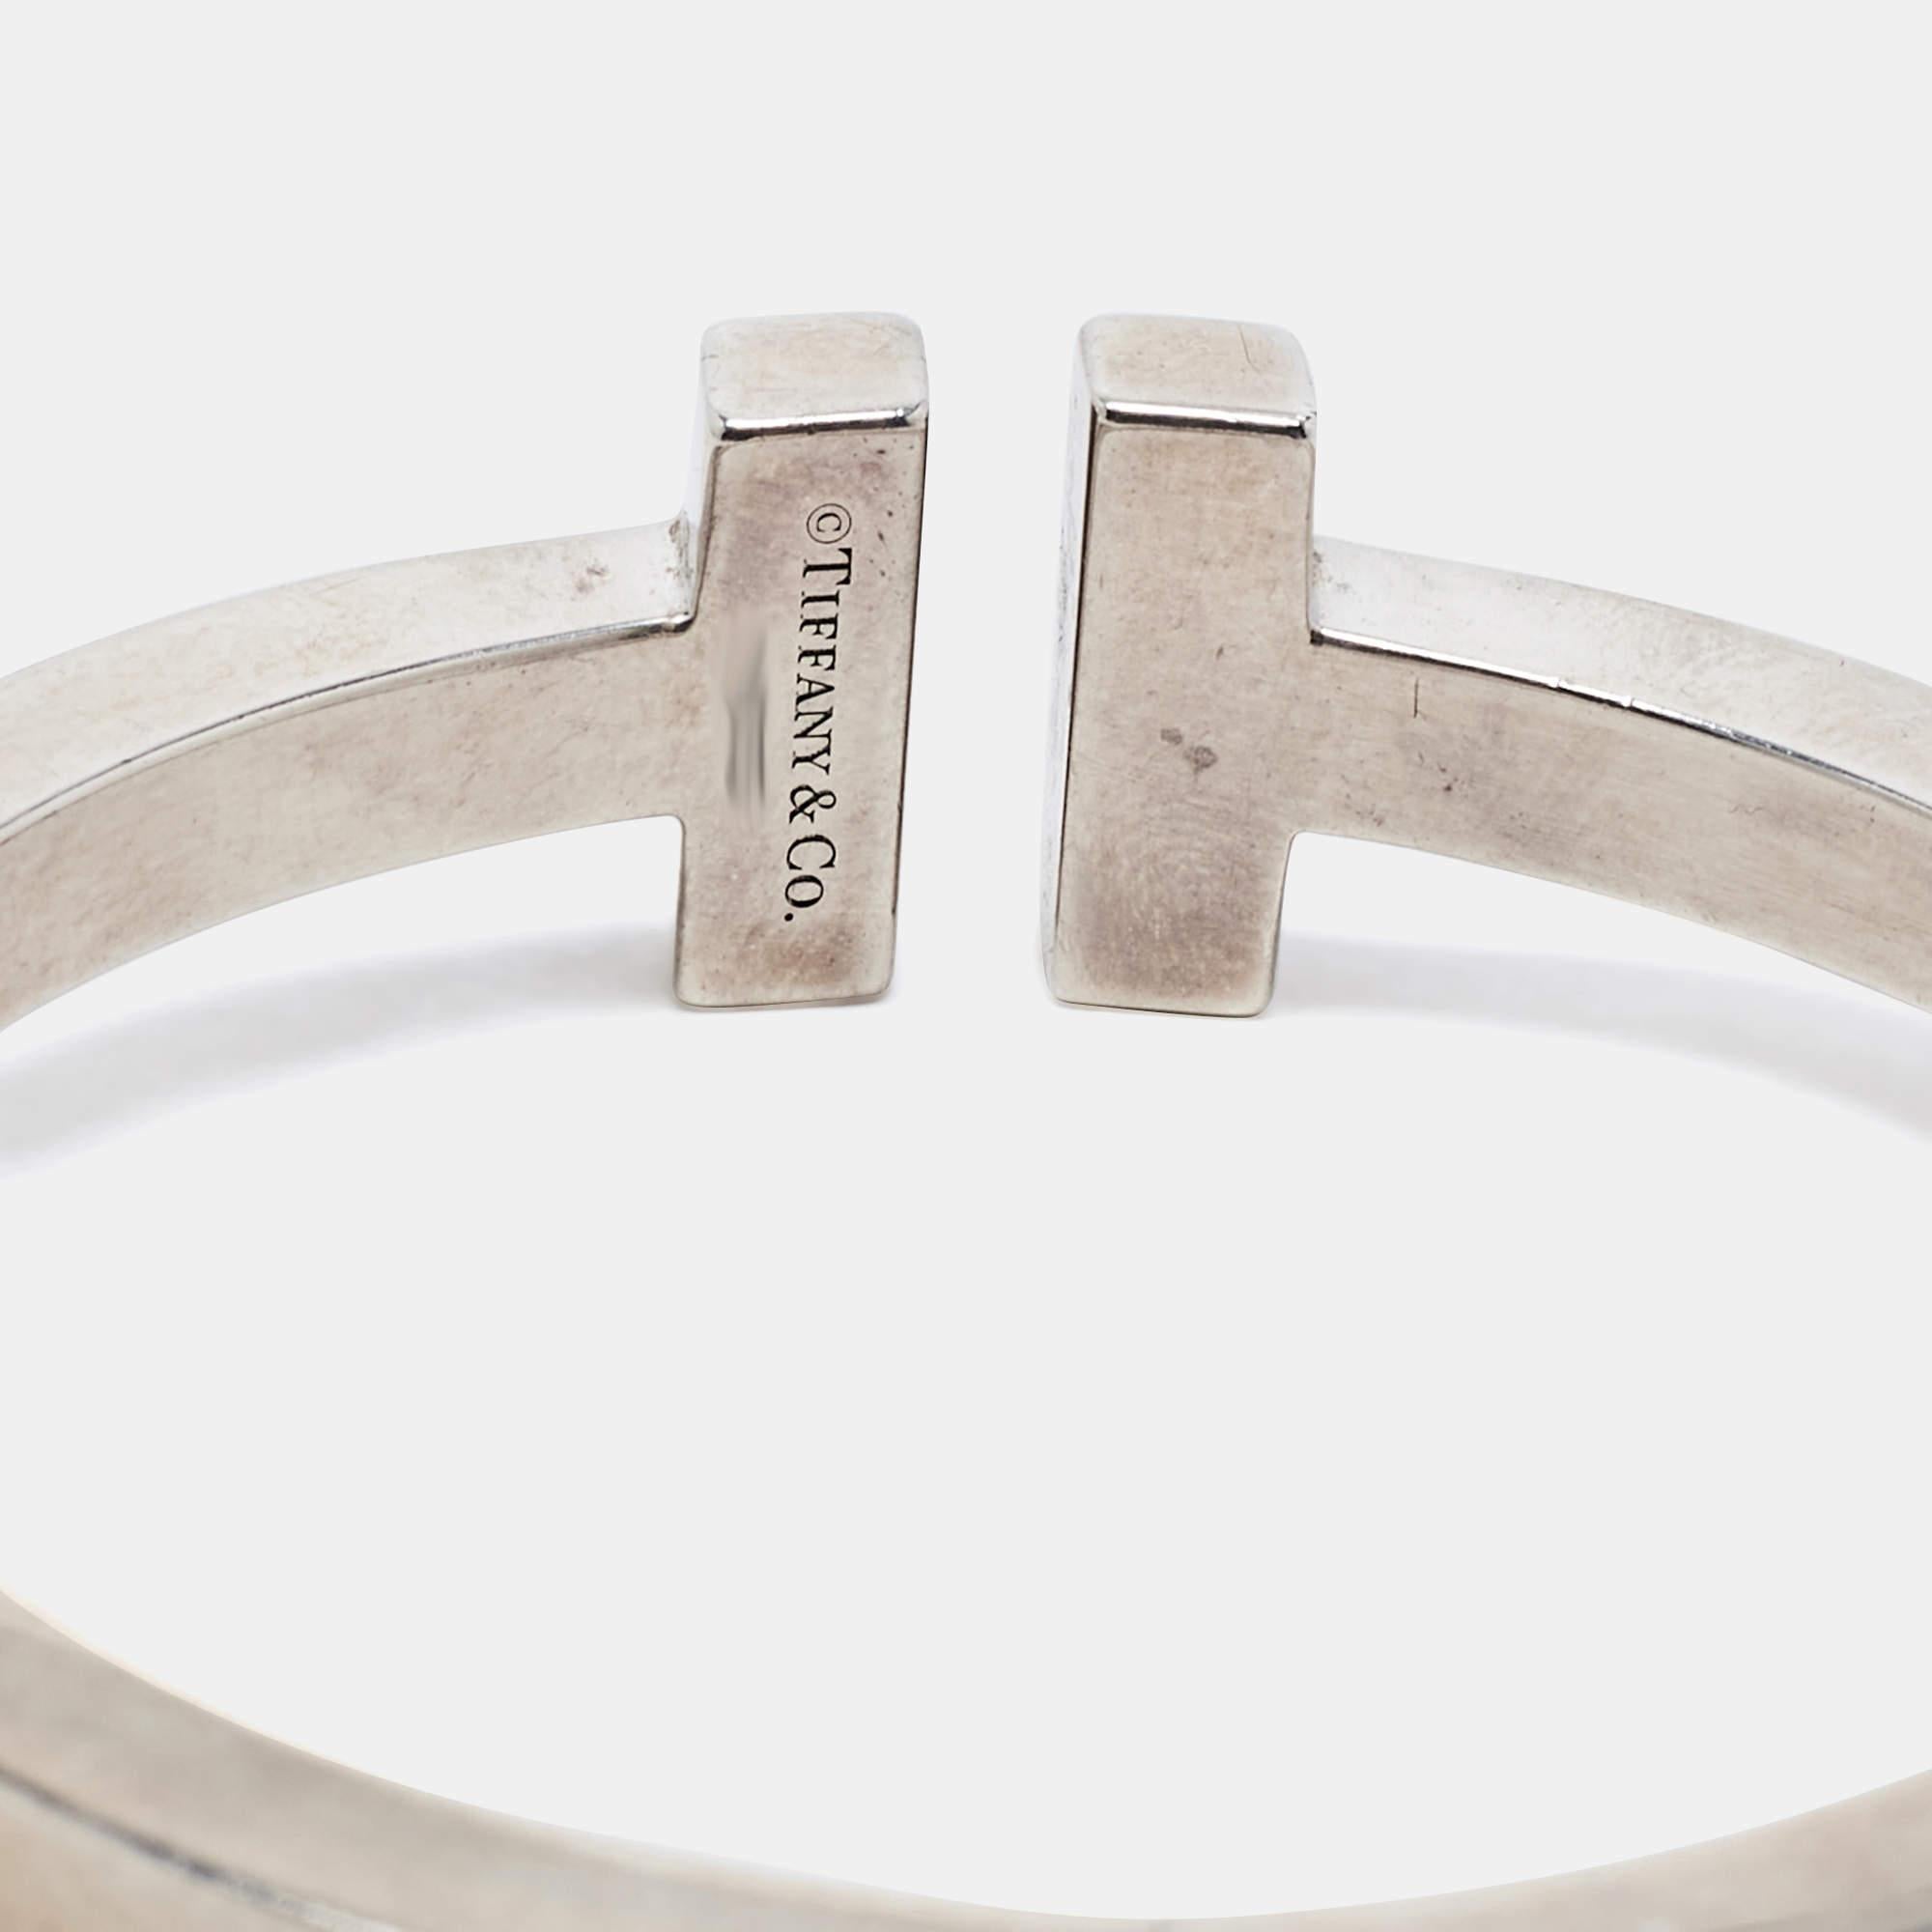 The choice of the best materials coupled with heritage artisanship makes this Tiffany silver bracelet a creation worth cherishing. It sits gracefully on any wrist.

Includes: Original Dustbag